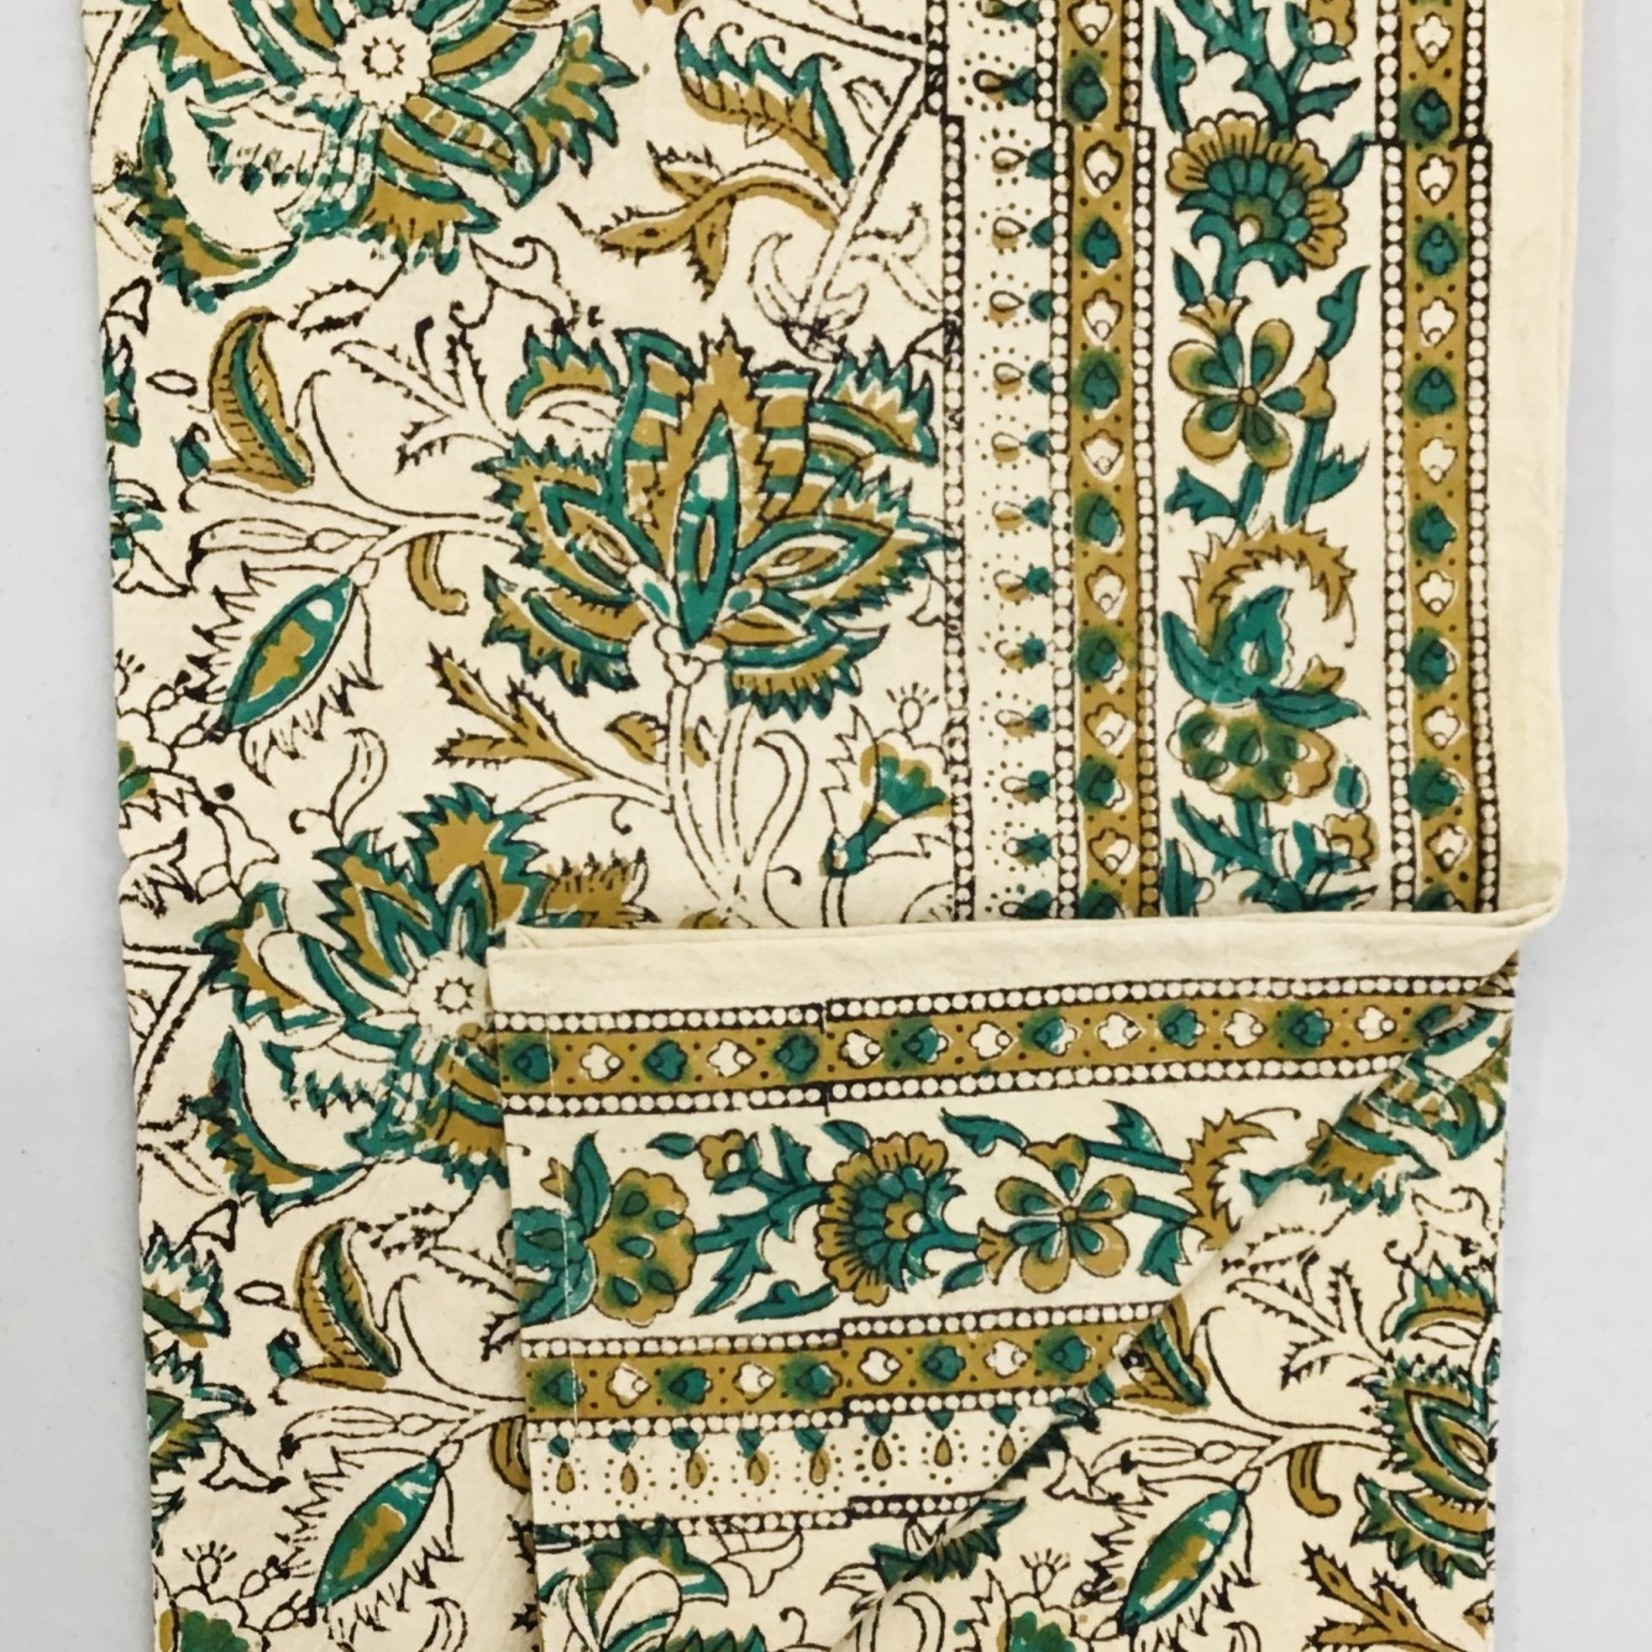 Ten Thousand Villages USA Greenery Table Runner, India